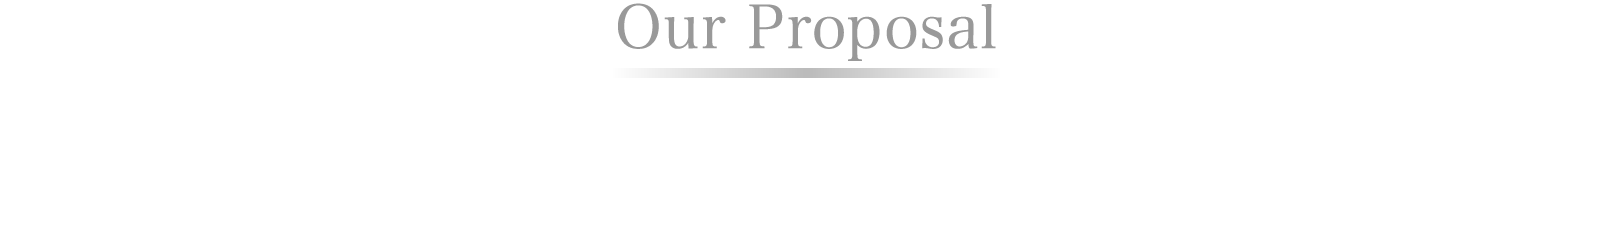 Our Proposal　高橋洋服店の提案